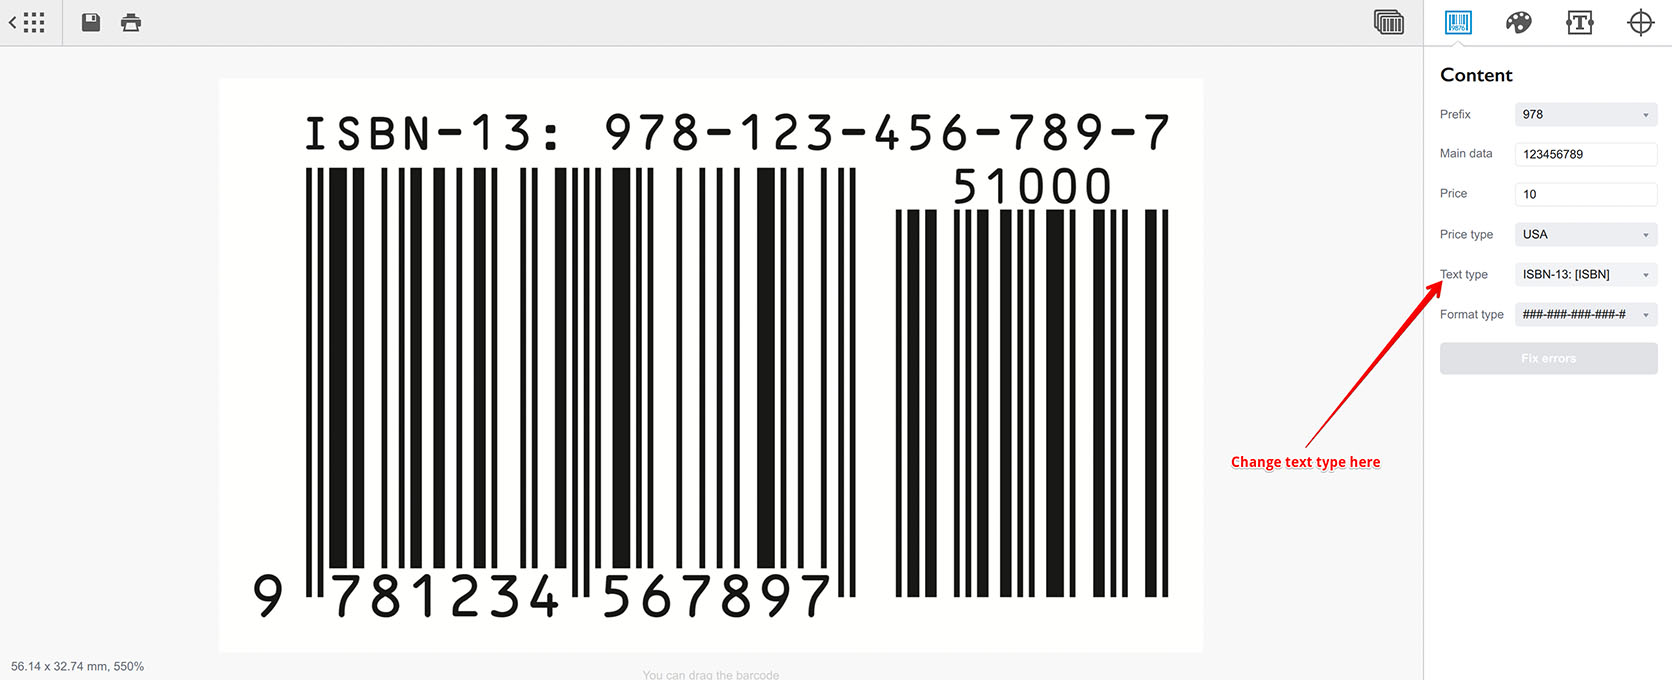 Starting with a simple ISBN barcode